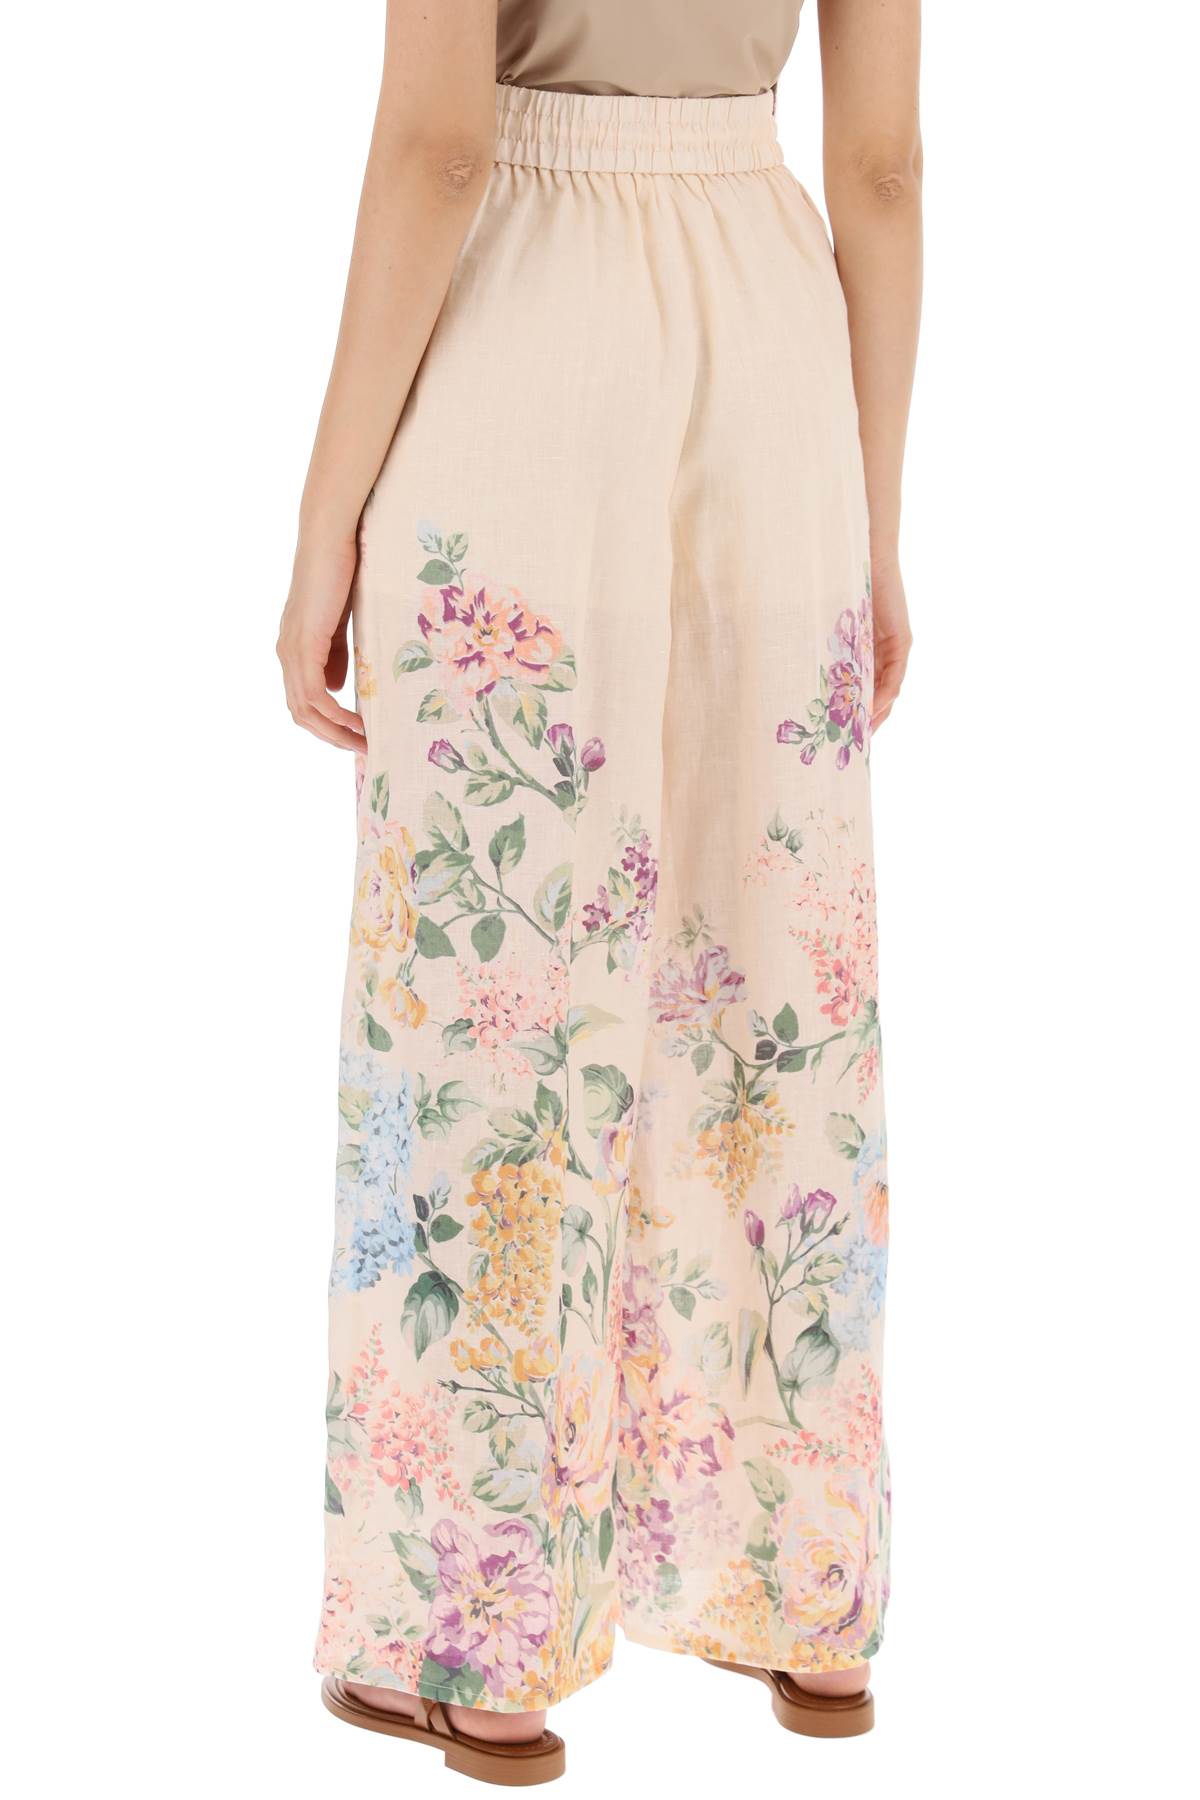 Shop Zimmermann Linen Pants By Halliday In Pink